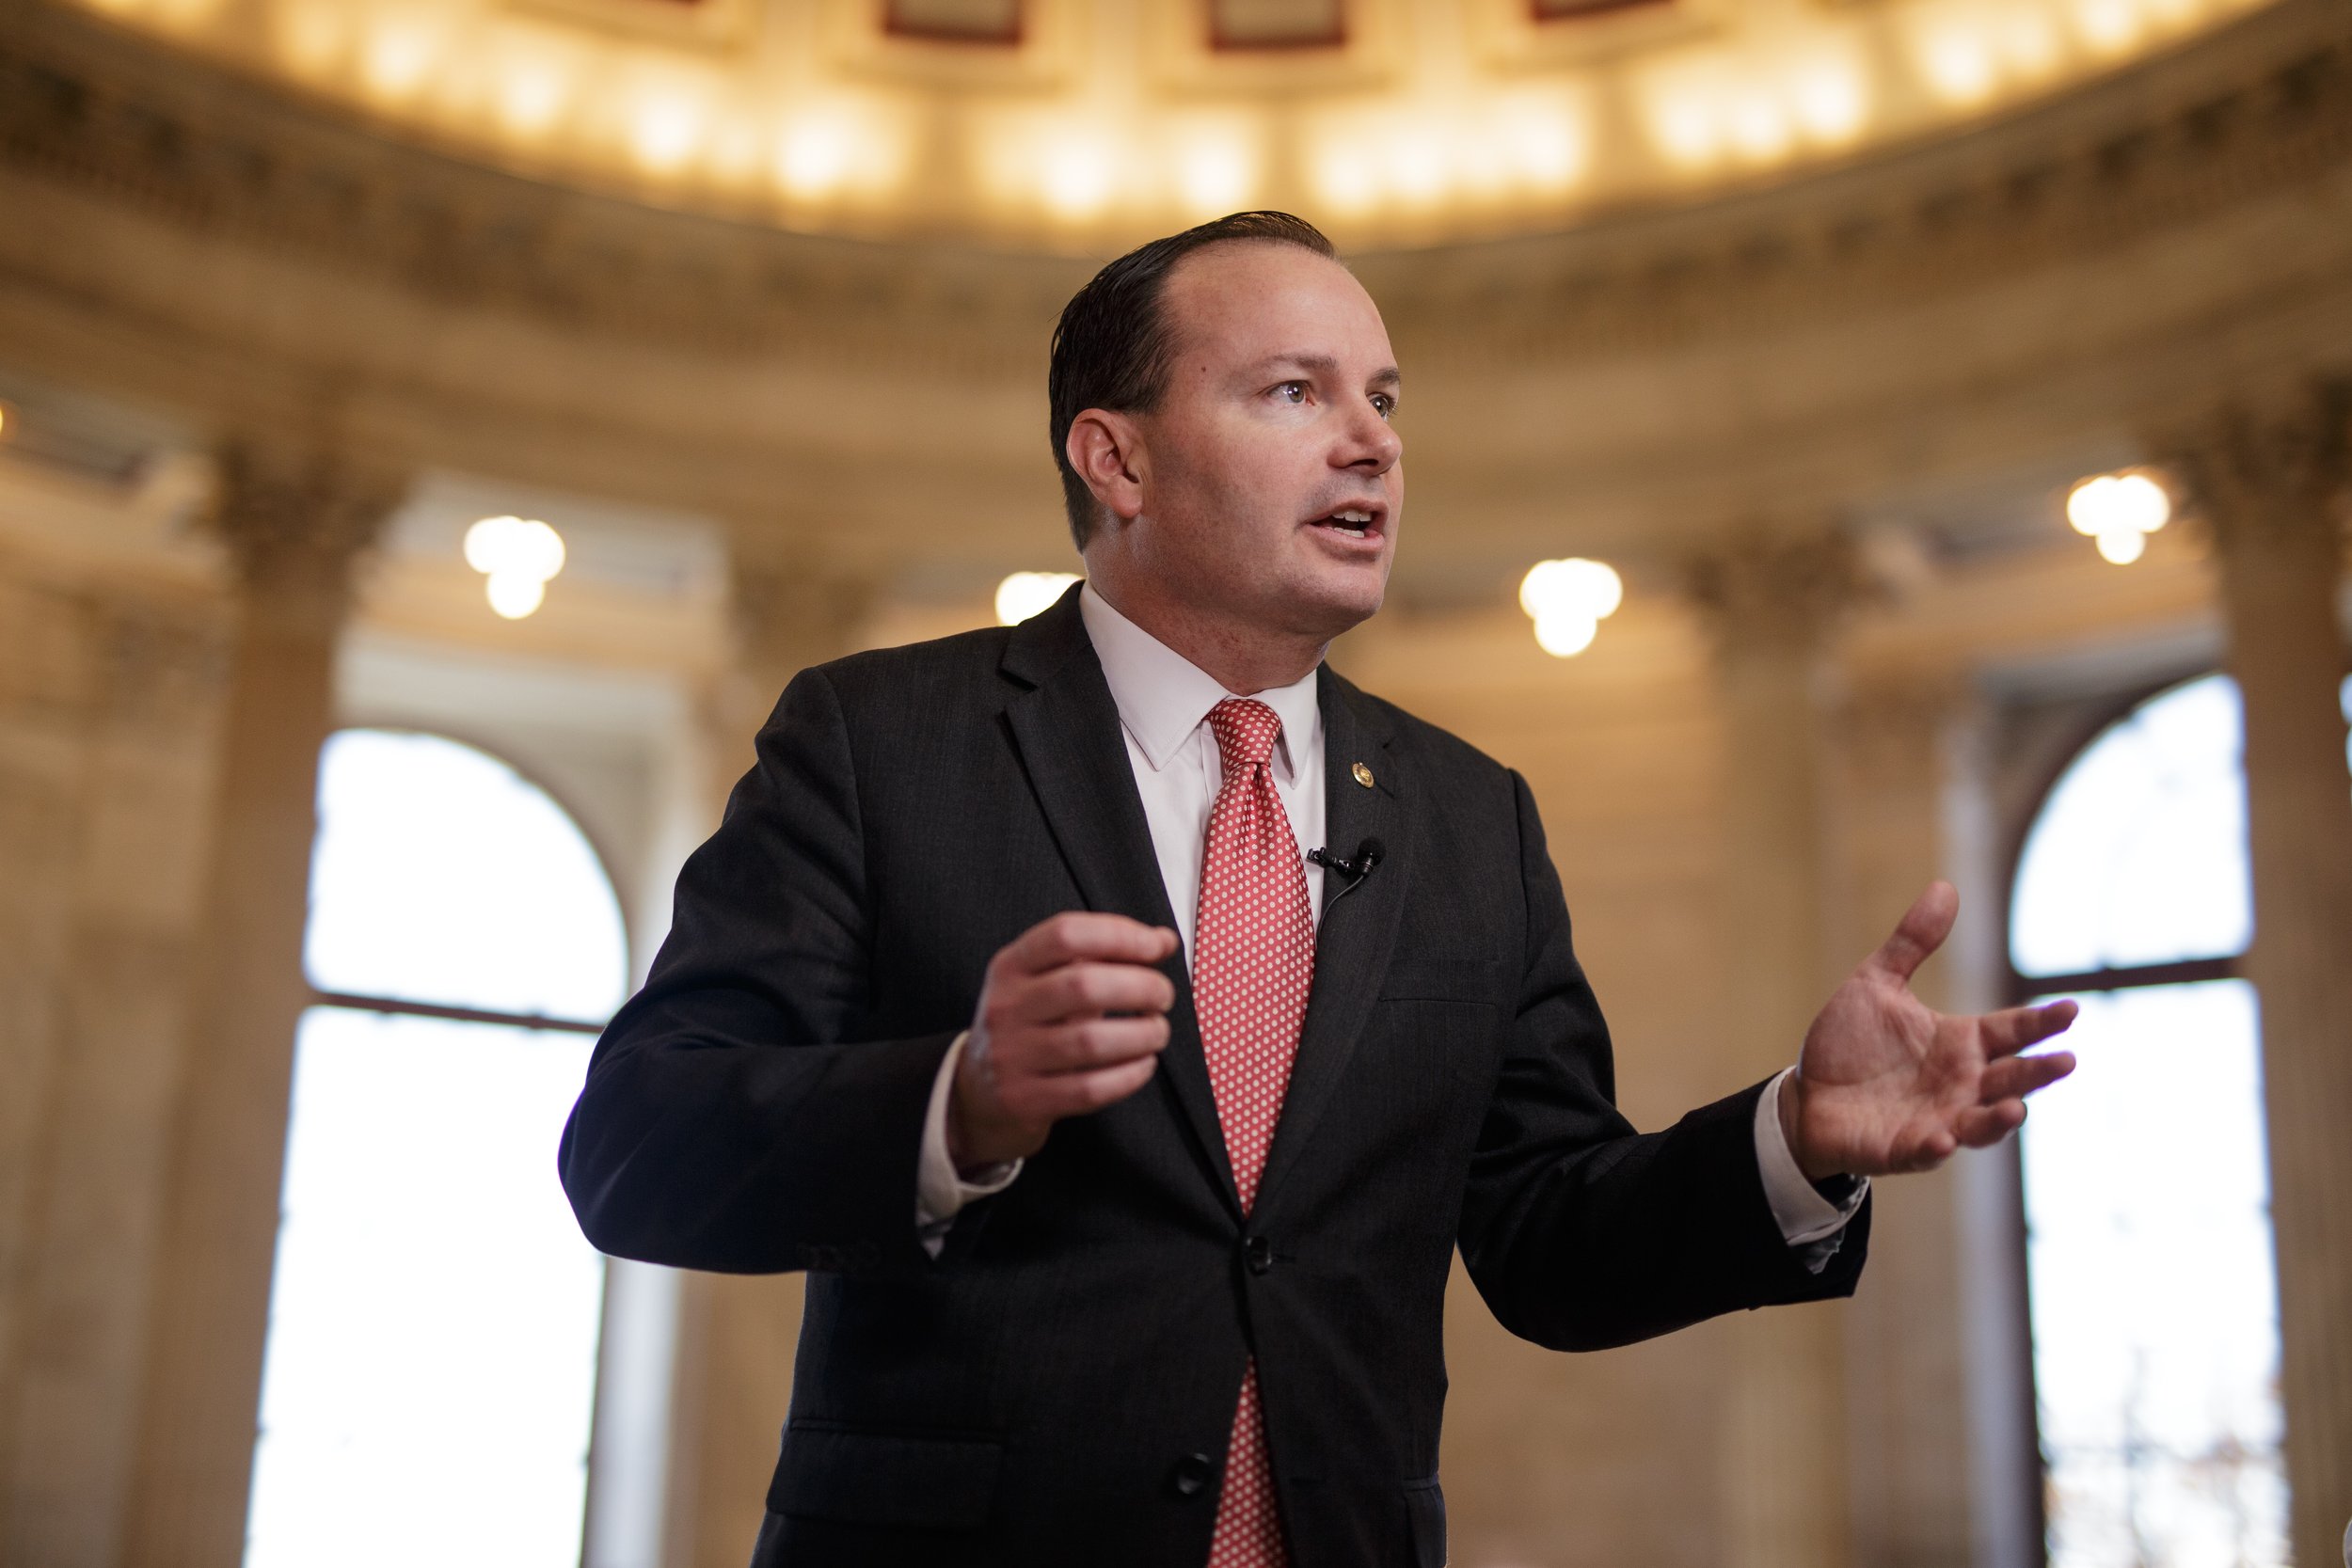  Sen. Mike Lee (R-UH) conducts a television interview in the Russell Rotunda.    November 2019   